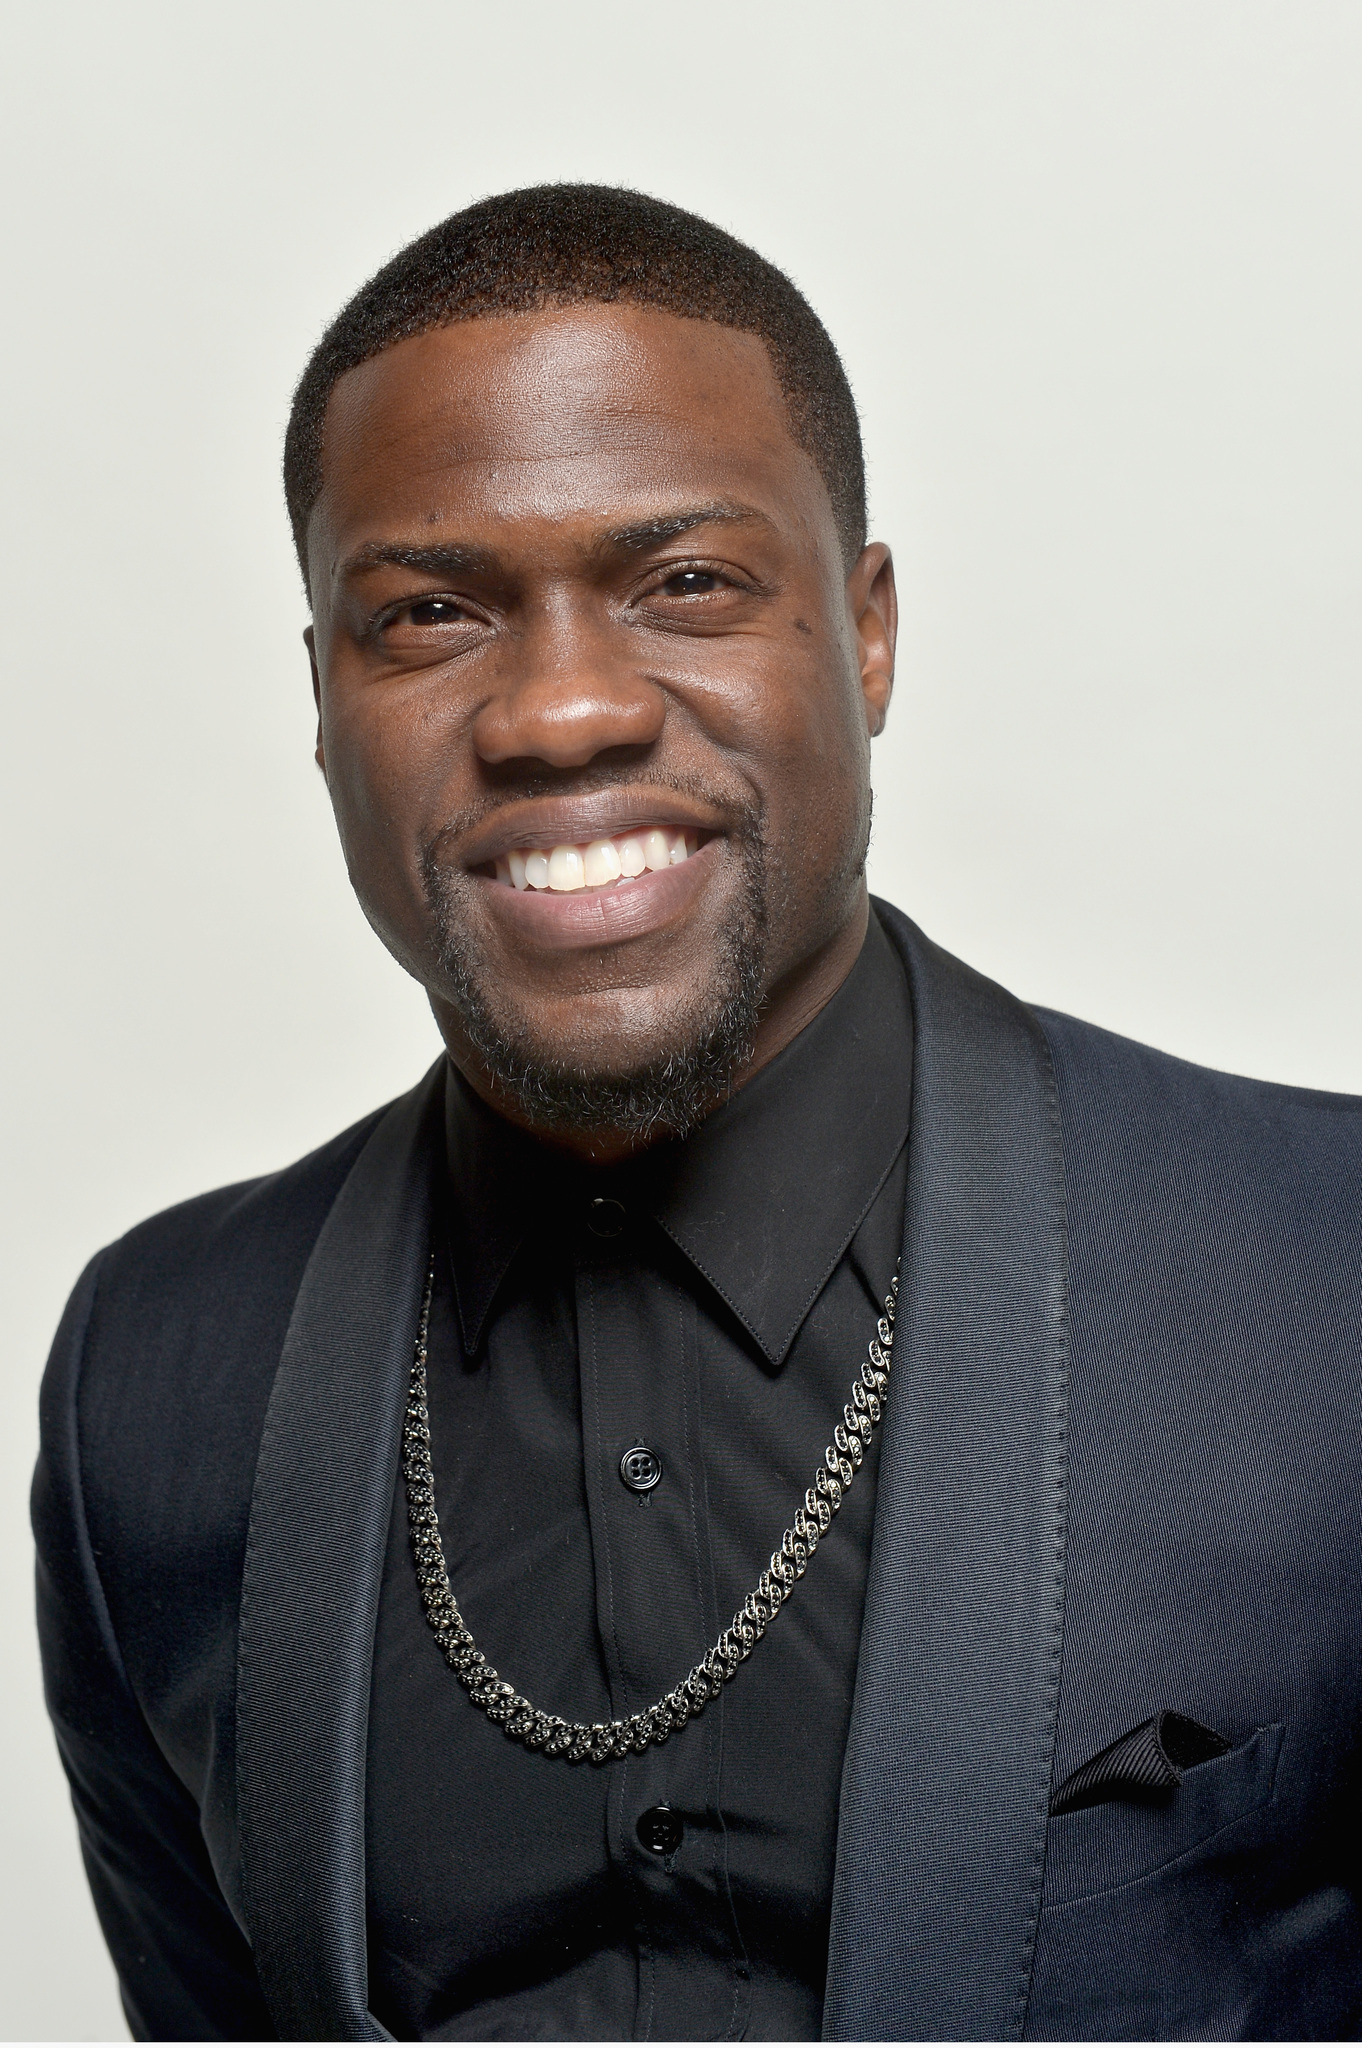 Kevin Hart
(Actor)